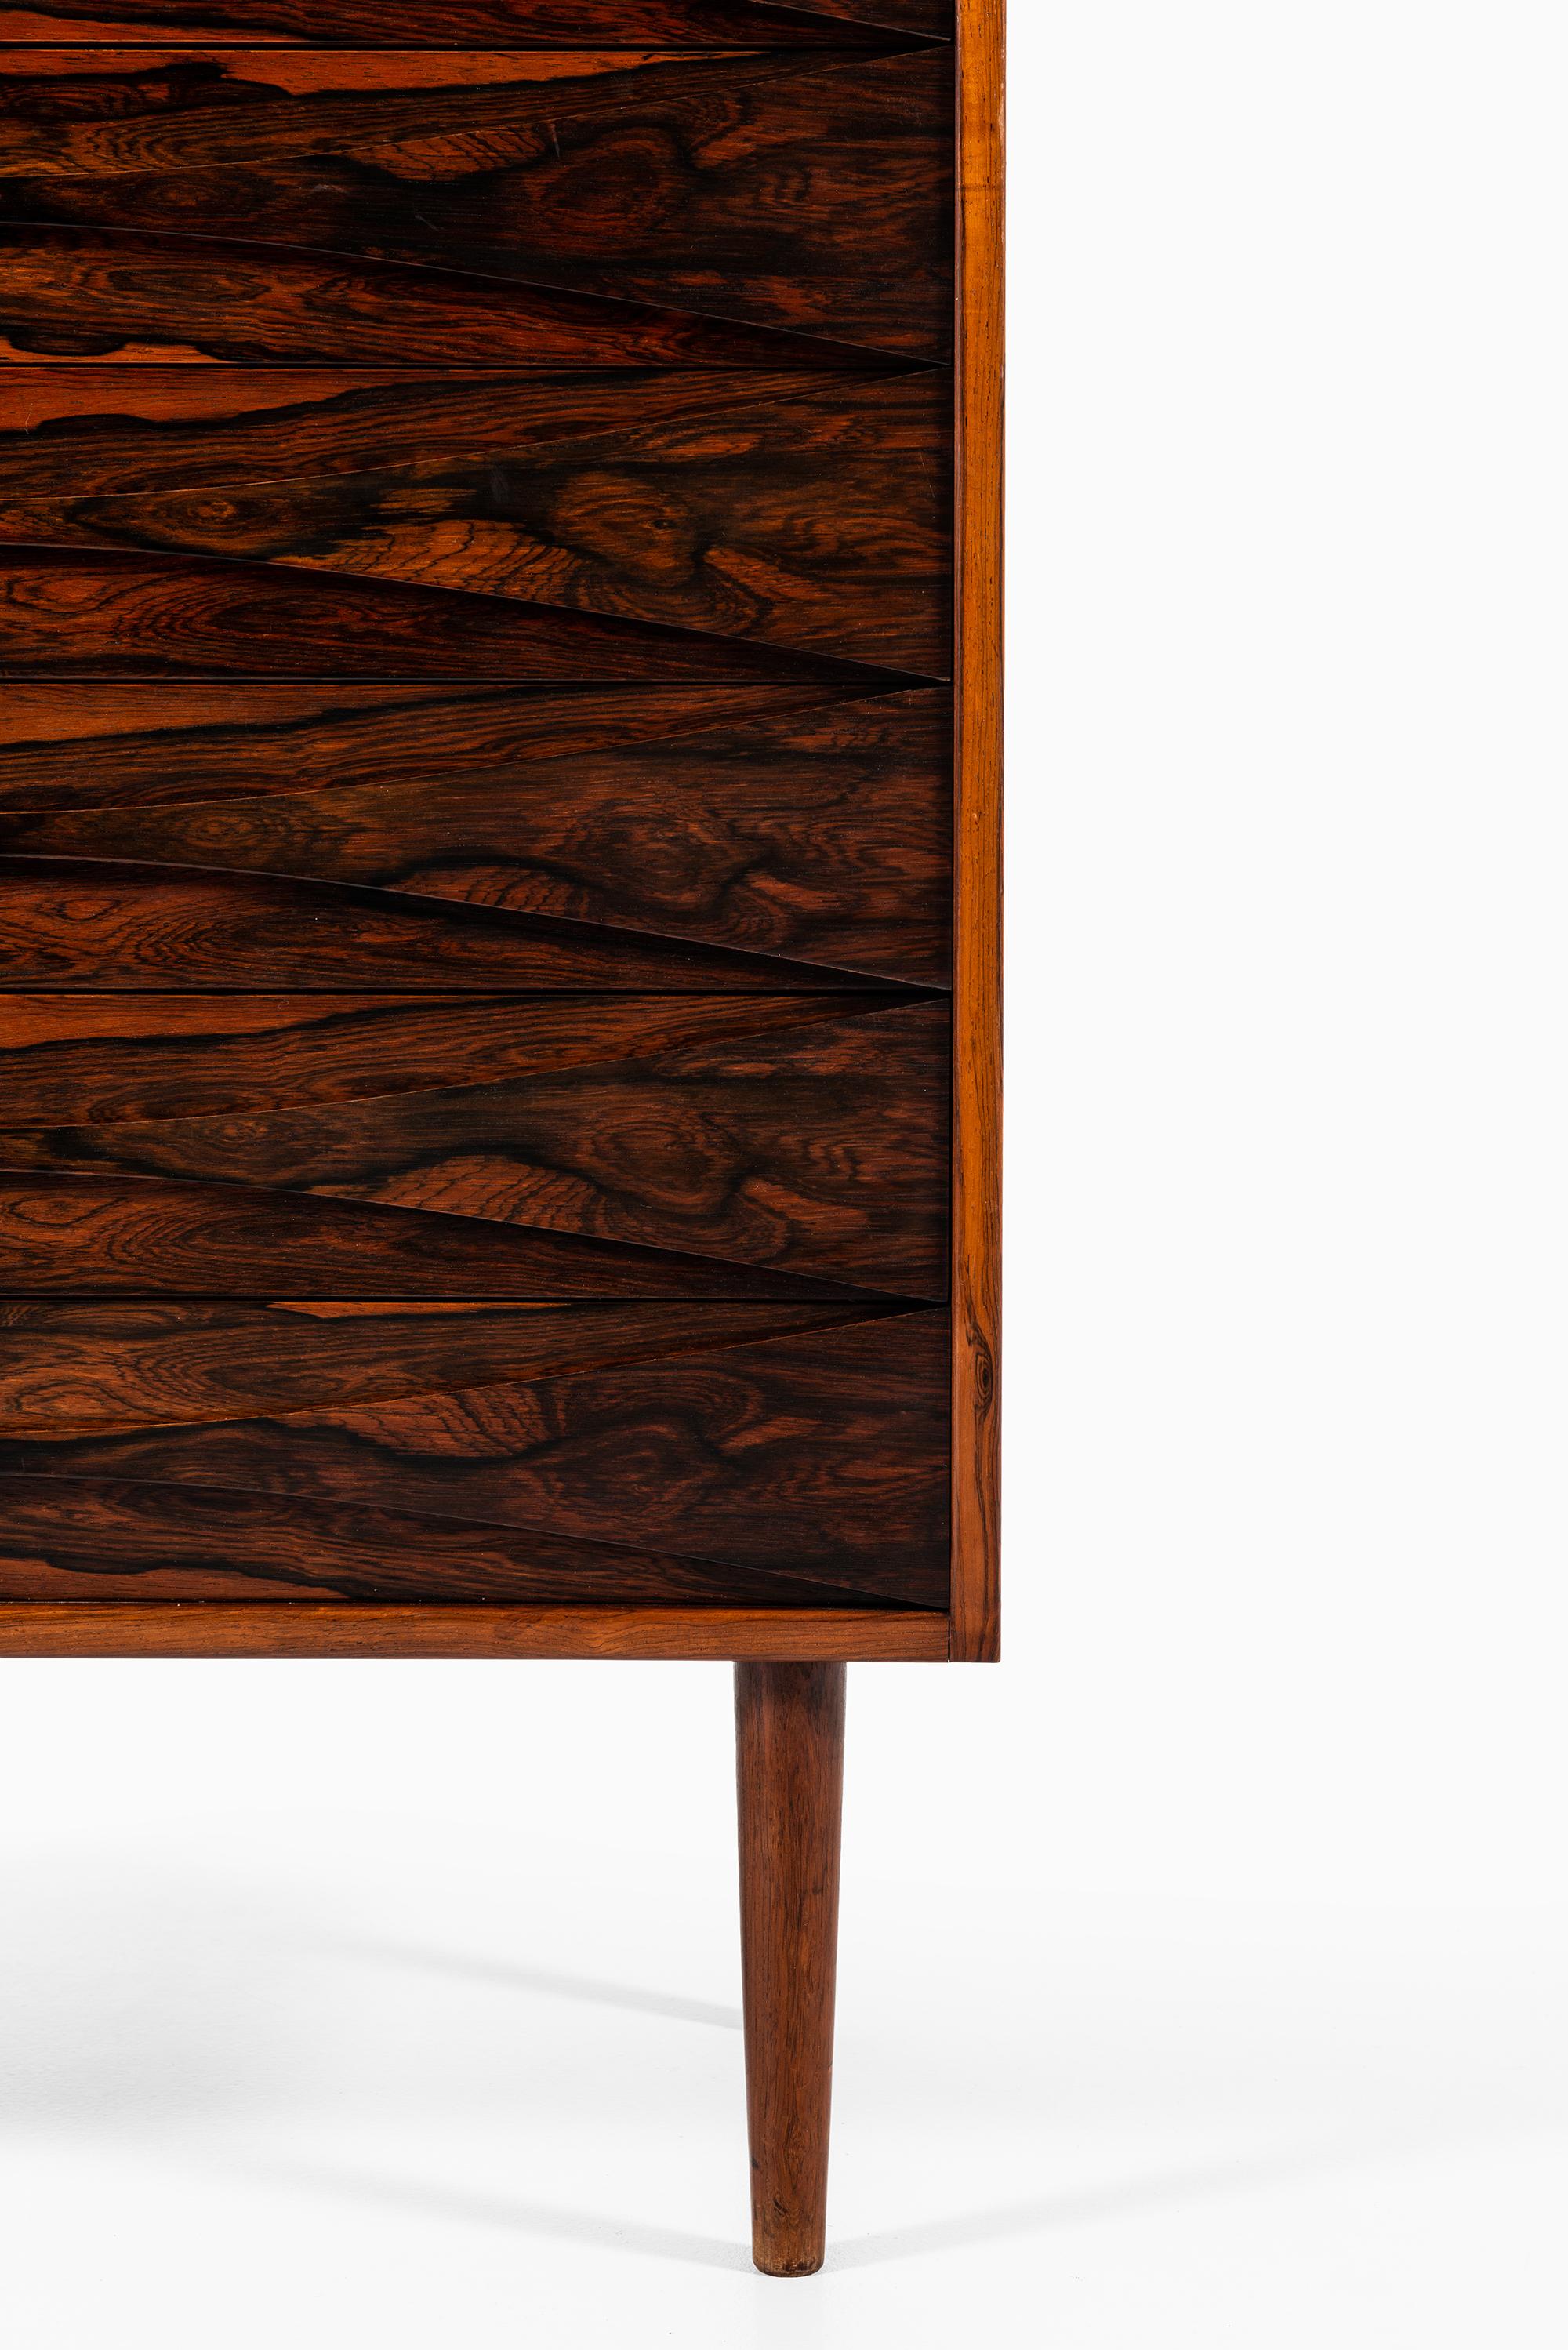 Mid-20th Century Arne Vodder Attributed Bureau Produced by N.C. Møbler in Denmark For Sale